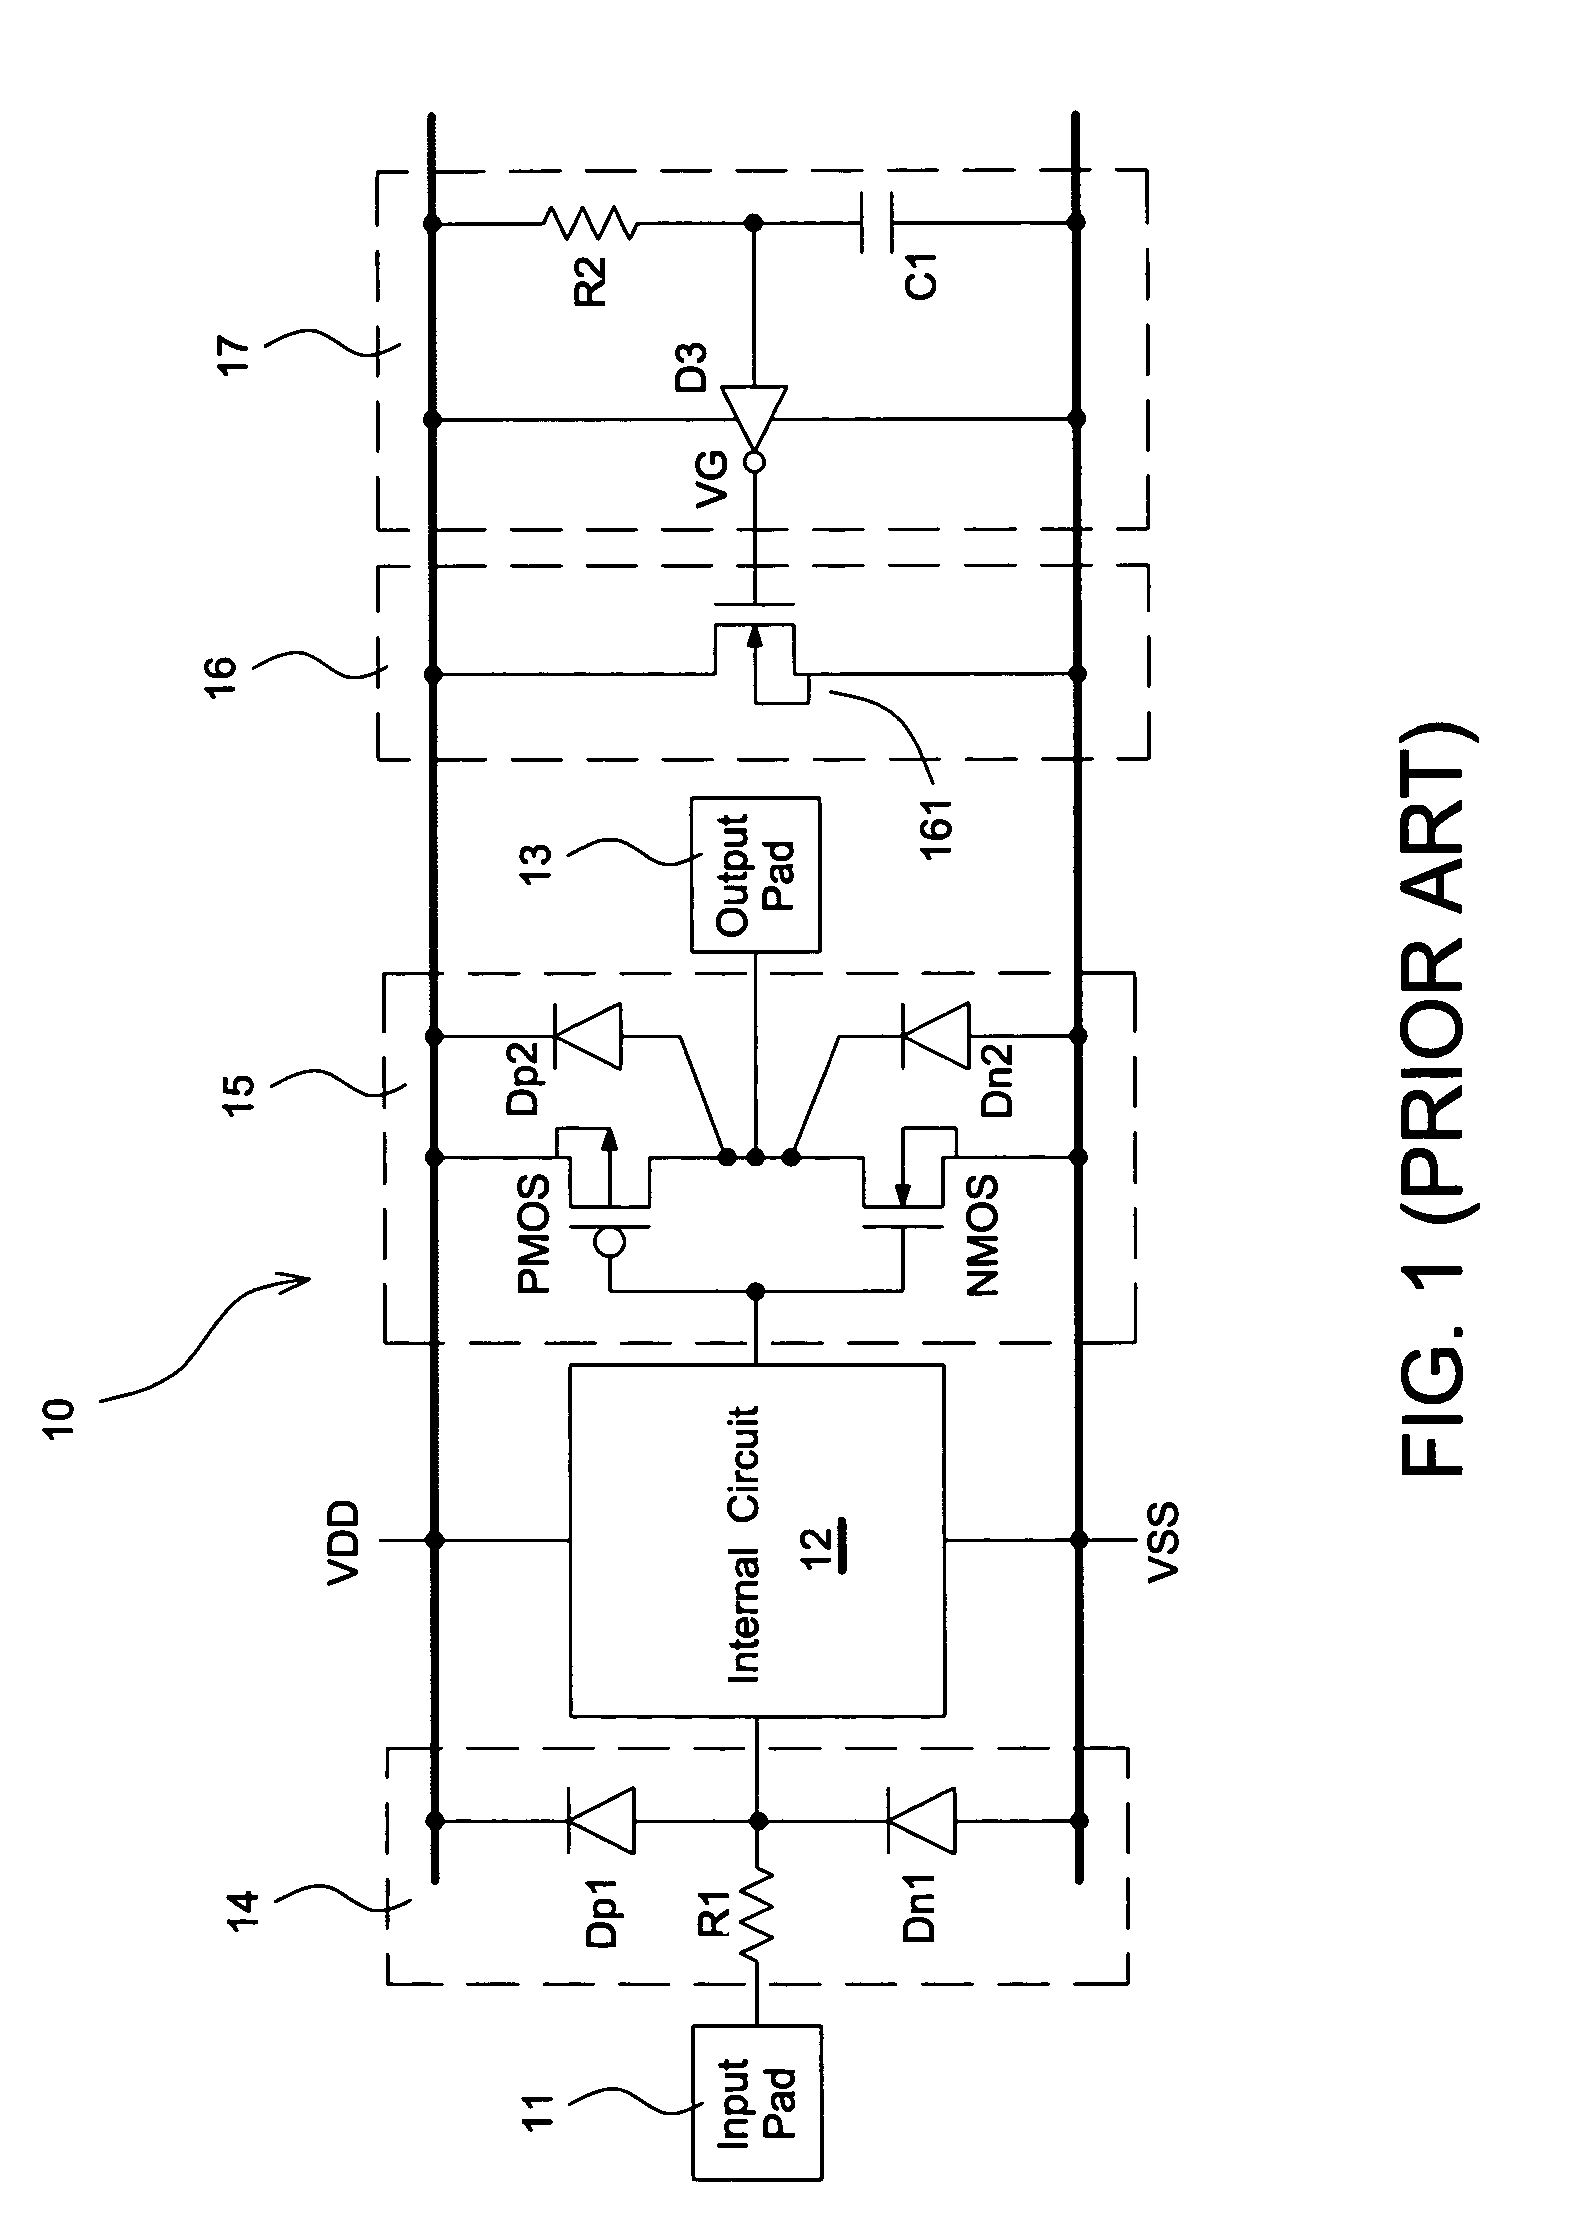 Electrostatic discharge clamp circuit